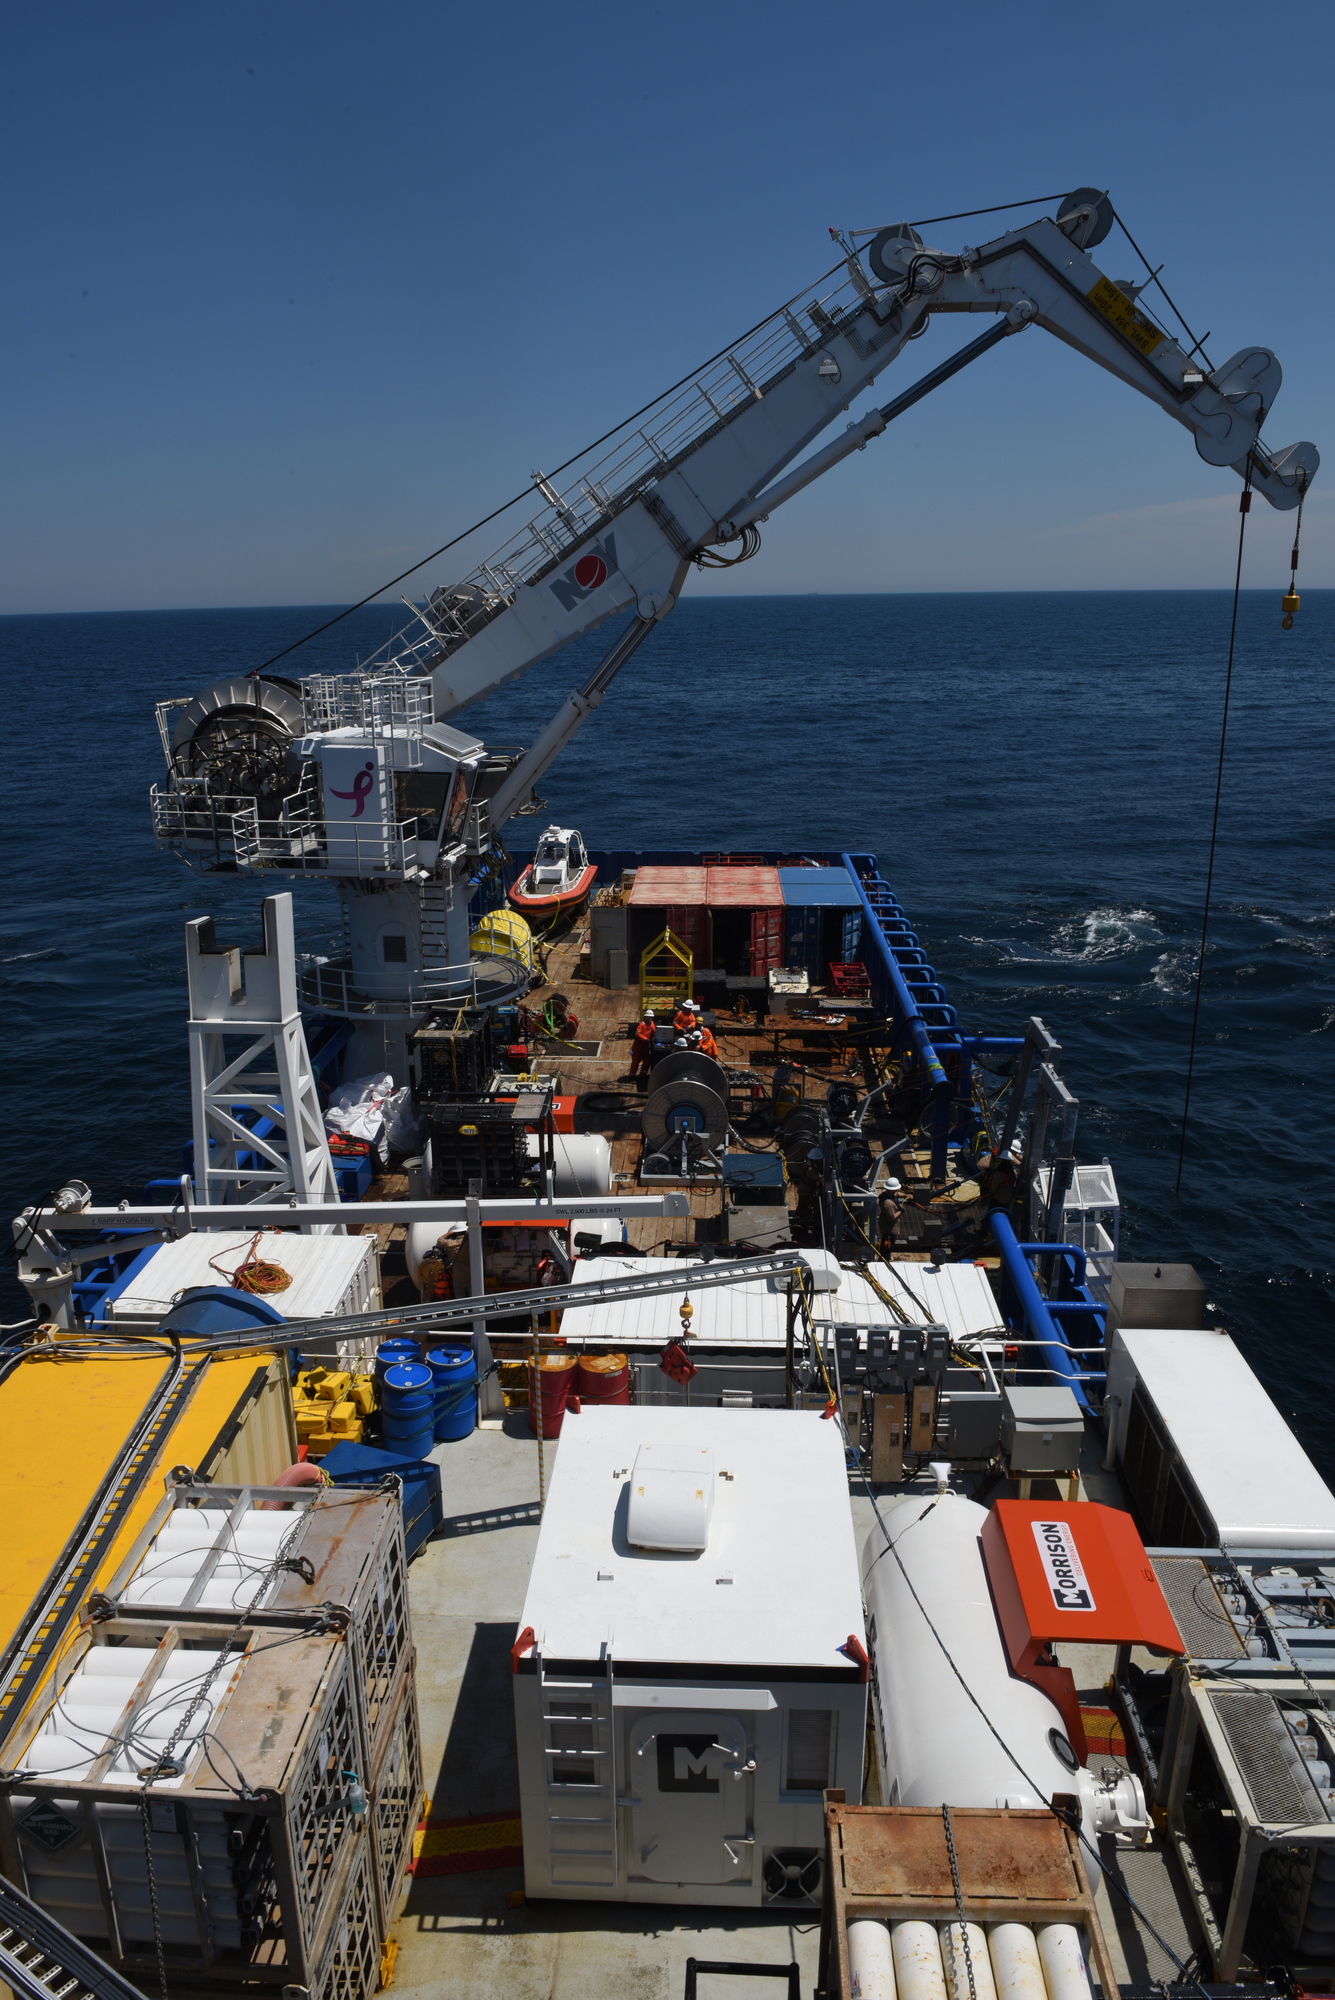 ATLANTIC OCEAN – The deck of the Shelia Bordelon is set for daily operations as divers and a remotely operated vehicle (ROV) prepared to work 180 feet below the surface on the tanker Coimbra wreck, May 16, 2019. The U.S. Coast Guard has contracted the Shelia Bordelon and Resolve Marine Group to conduct a full assessment of oil remaining on the Coimbra wreck, located approximately 30 miles southeast of Shinnecock, N.Y. If substantial oil still remains, and if feasible, the Coast Guard will work with Resolve Marine Group to remove oil from the wreck in order to reduce pollution risks to the environment. The Coimbra, a British-flagged supply ship, sunk off the coast of Long Island in January 1942 when a German U-boat torpedoed it. (U.S. Coast Guard photo by Chief Warrant Officer Allyson E.T. Conroy)